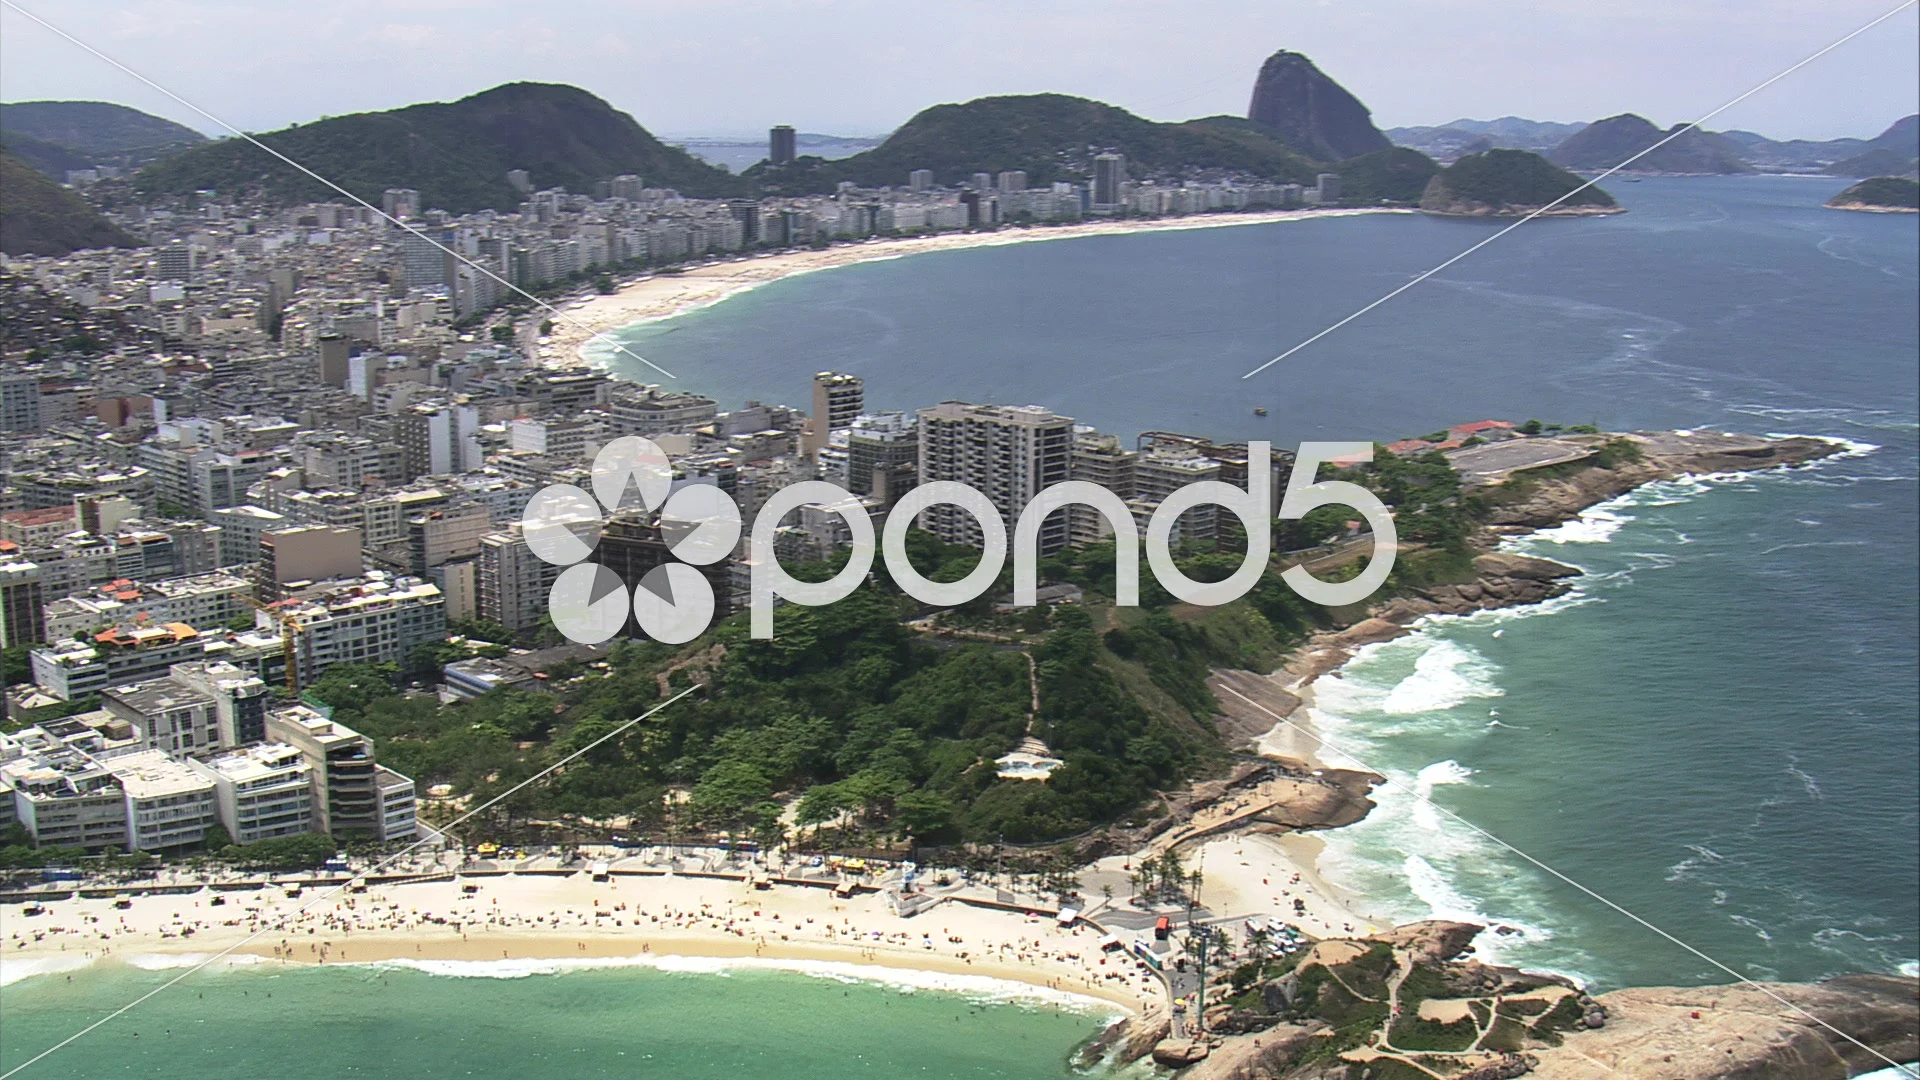 A bird flying near Sugar Loaf. Copacabana Beach in the background on a  typical sunny day. | Copacabana beach, Places to visit, Beach